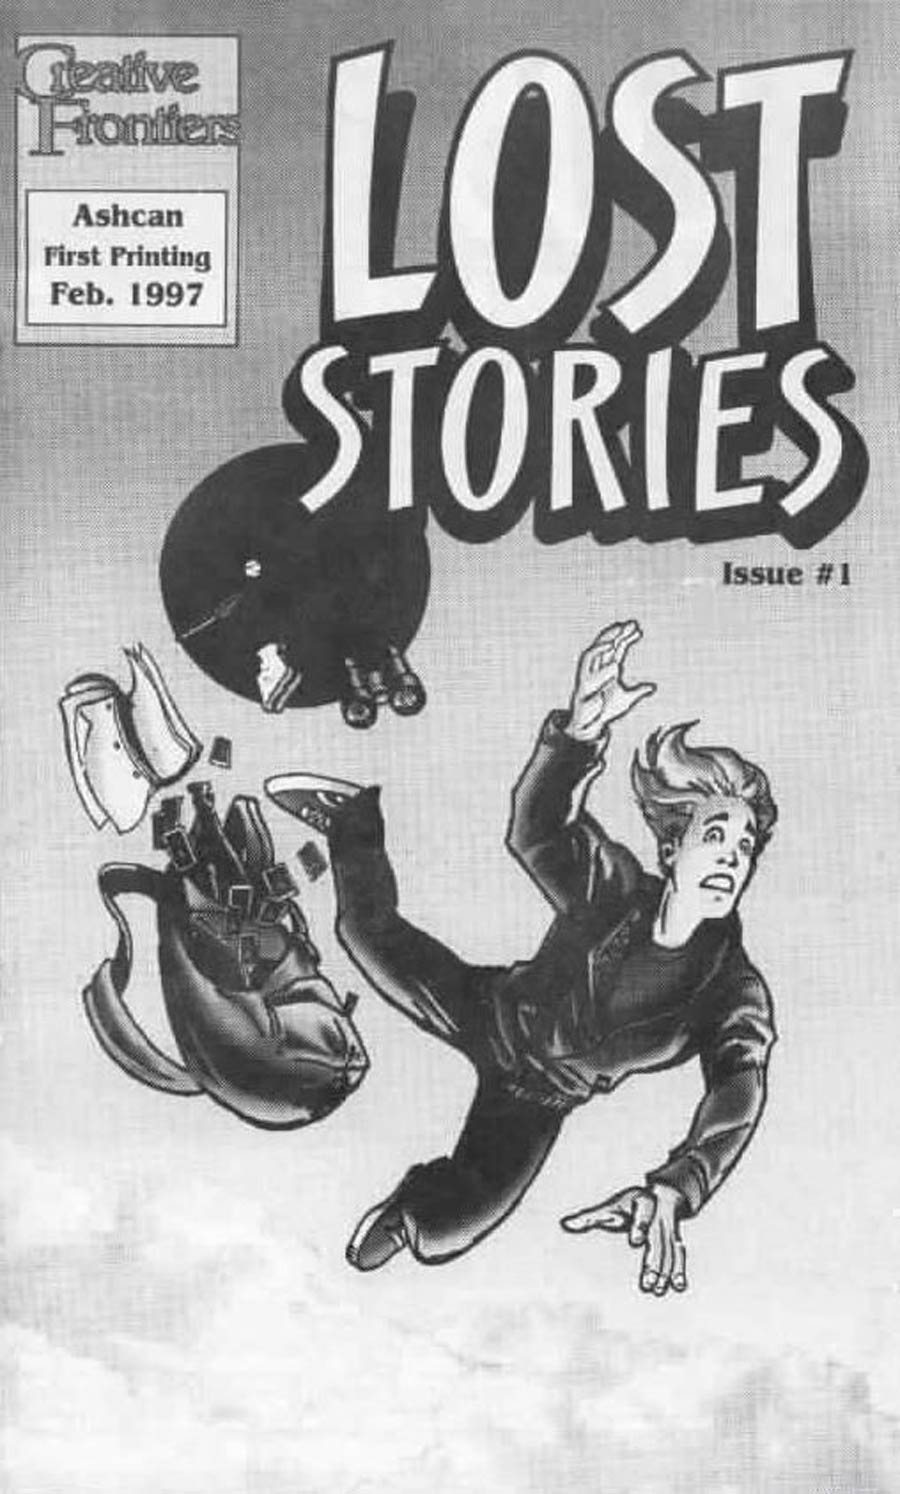 Lost Stories Ashcan Edition